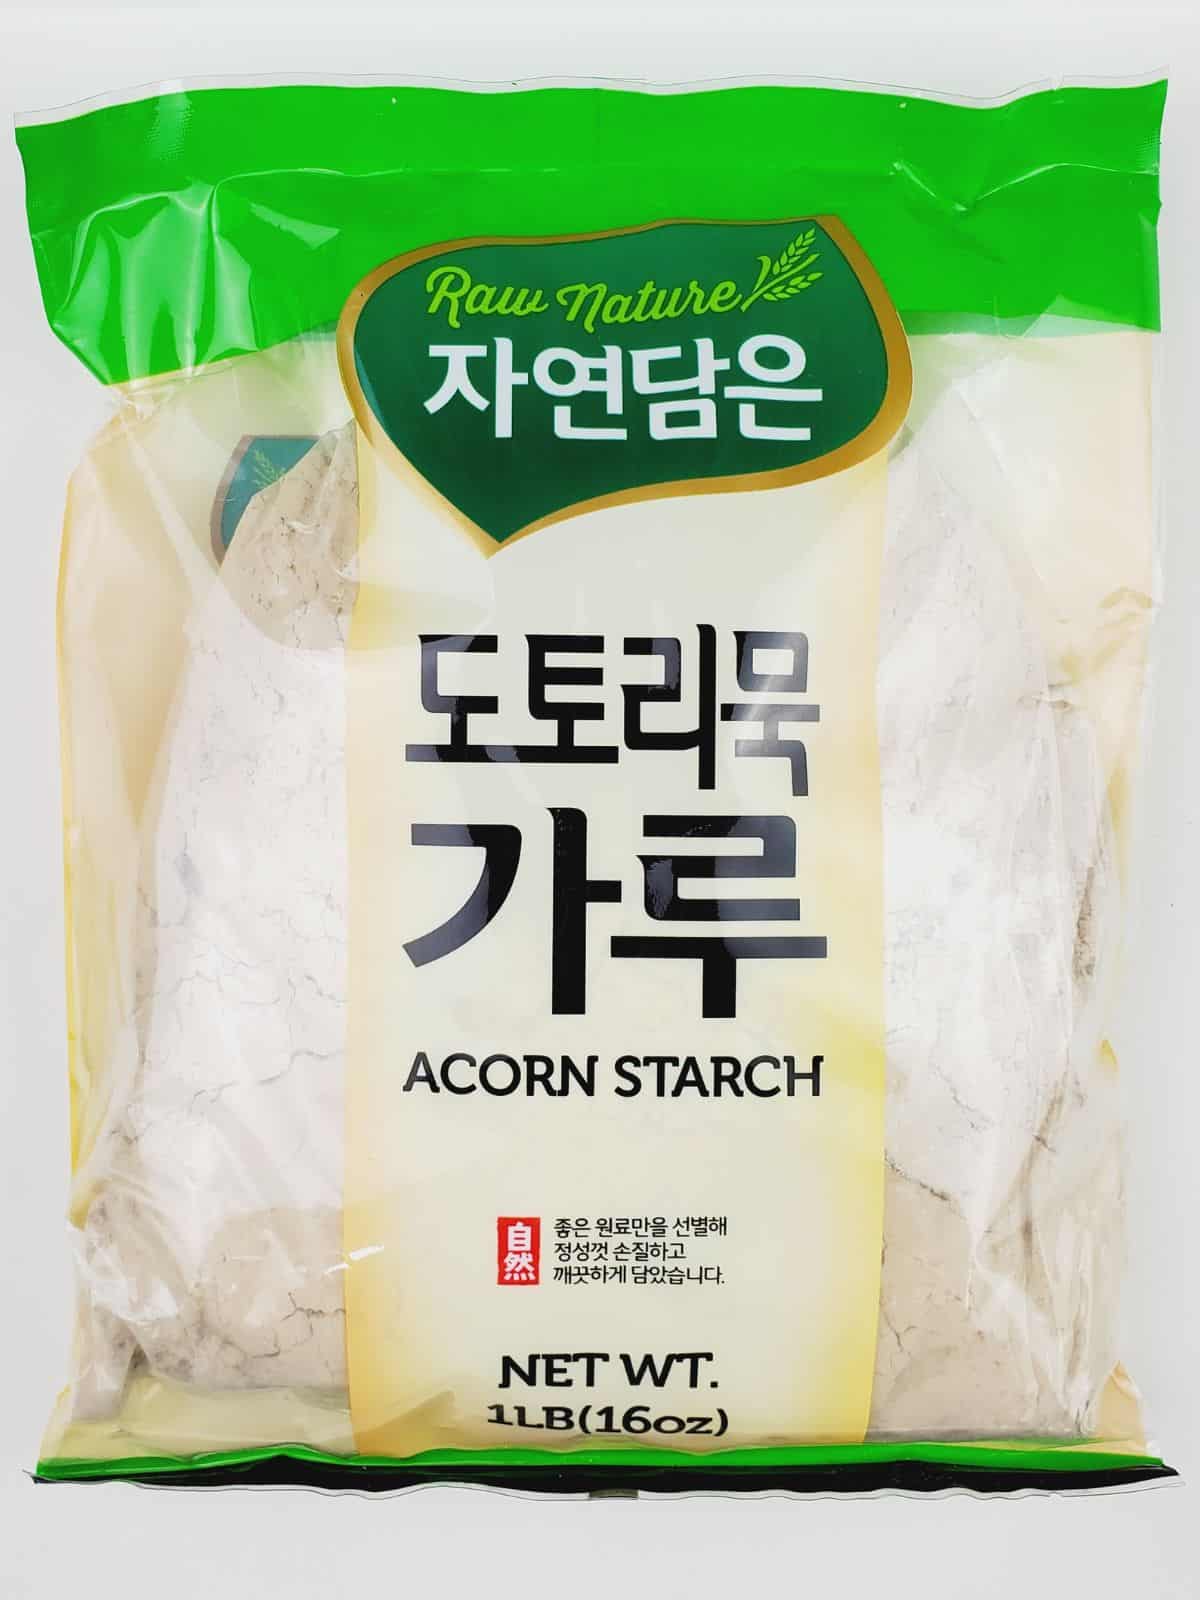 a pack of 1 LB of acorn starch from Raw Nature.